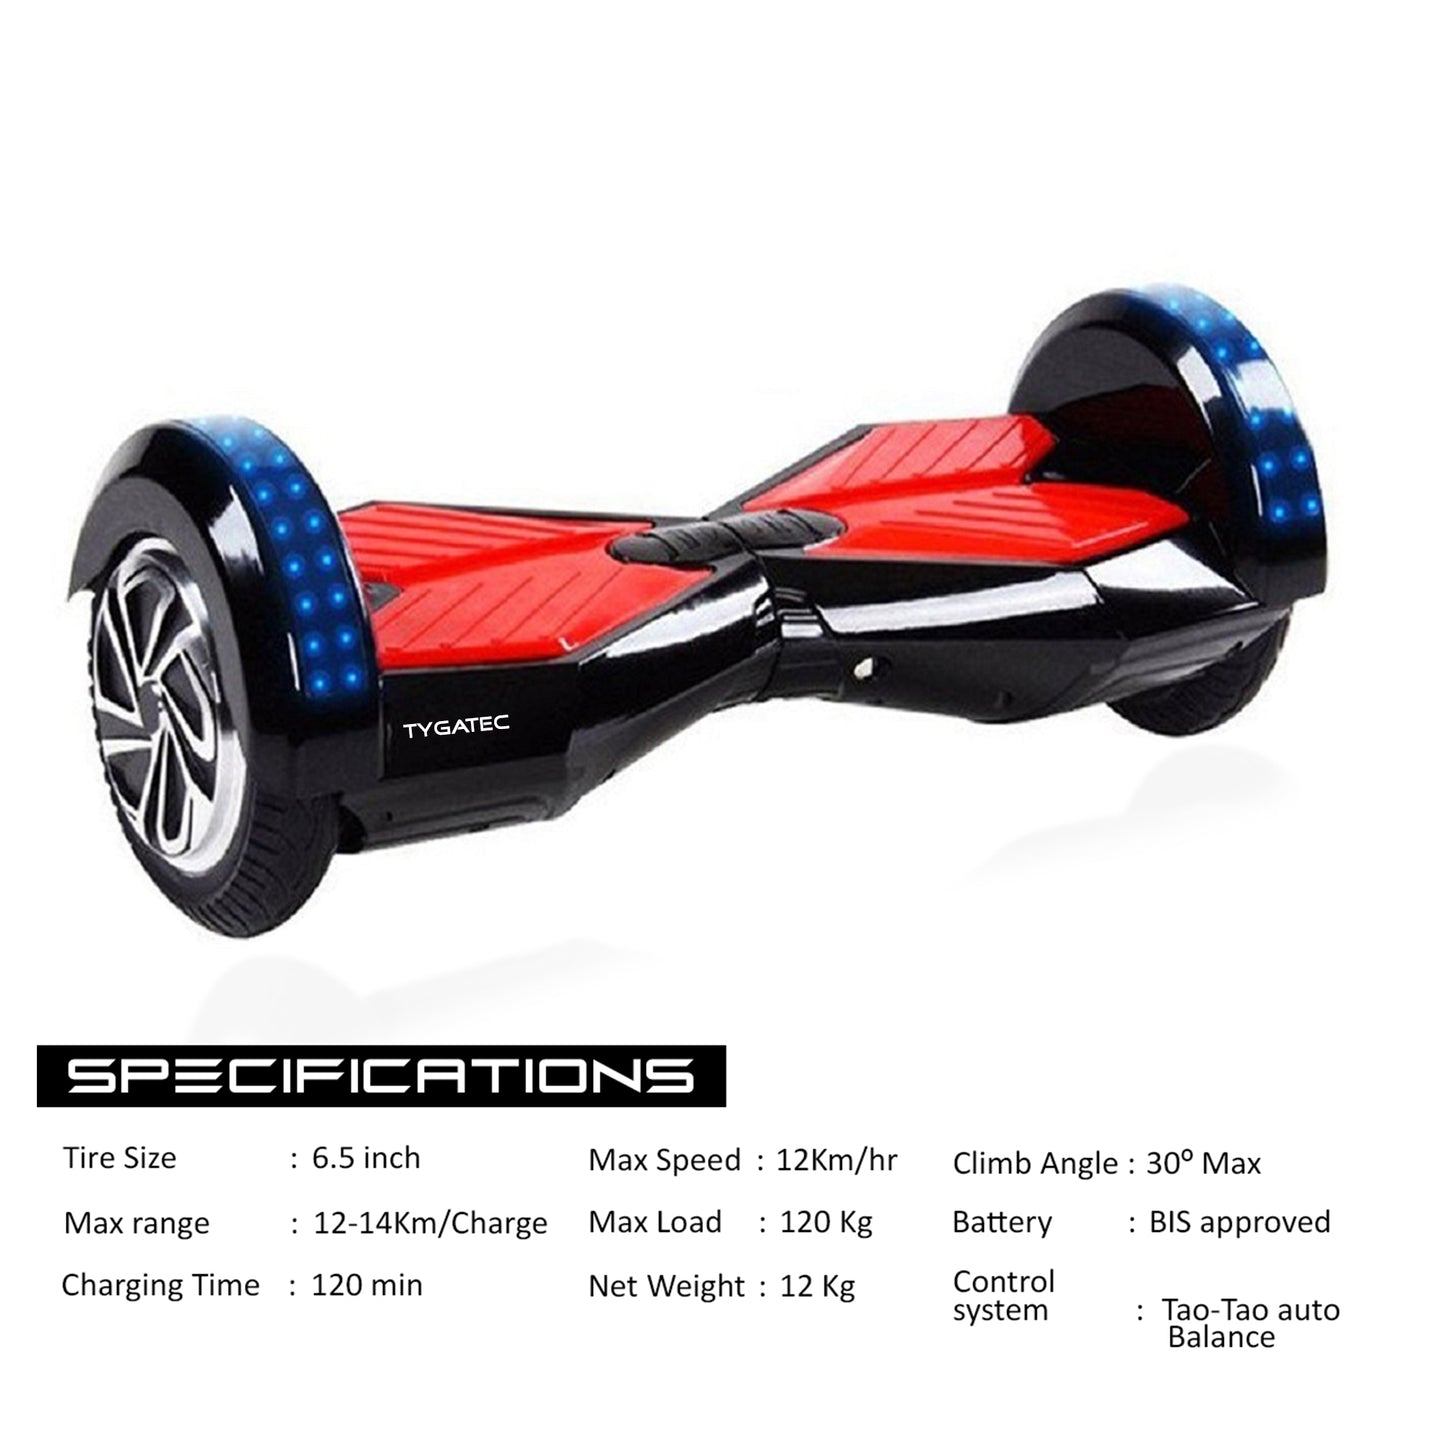 TYGATEC T5 - Powered Up Auto Balancing Hoverboard